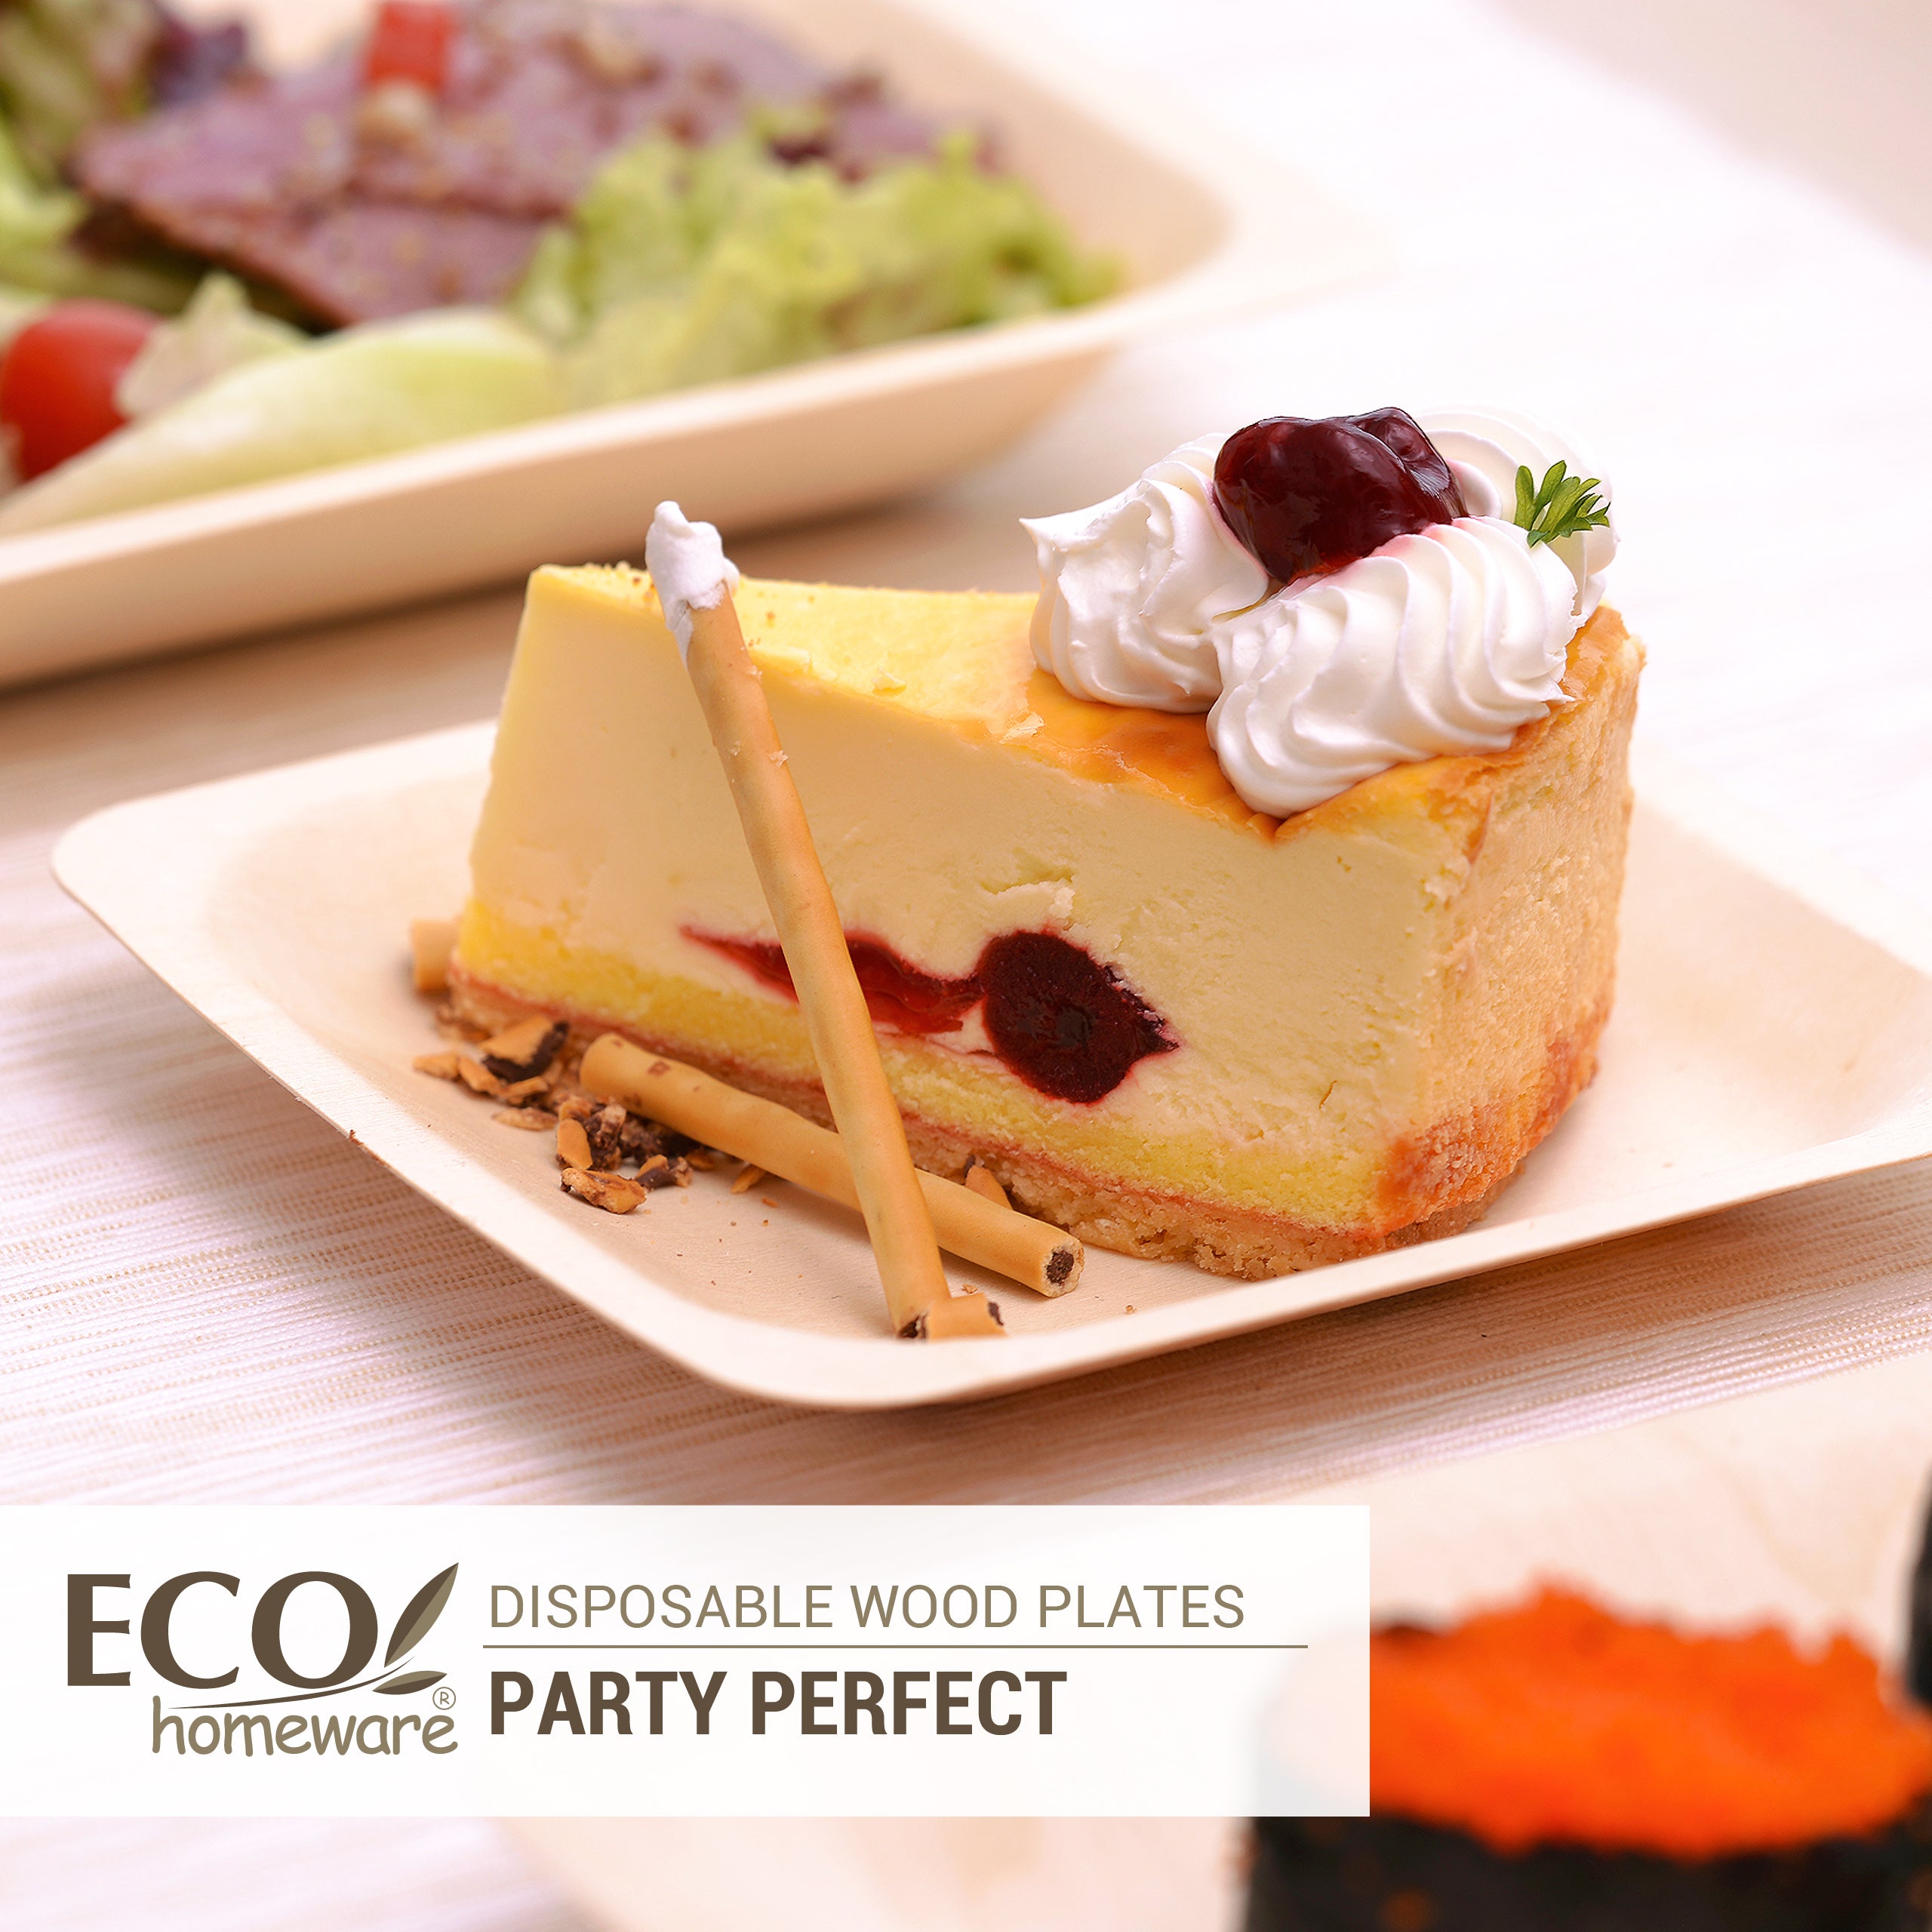 A slice of cake using eco homeware disposable wood plates